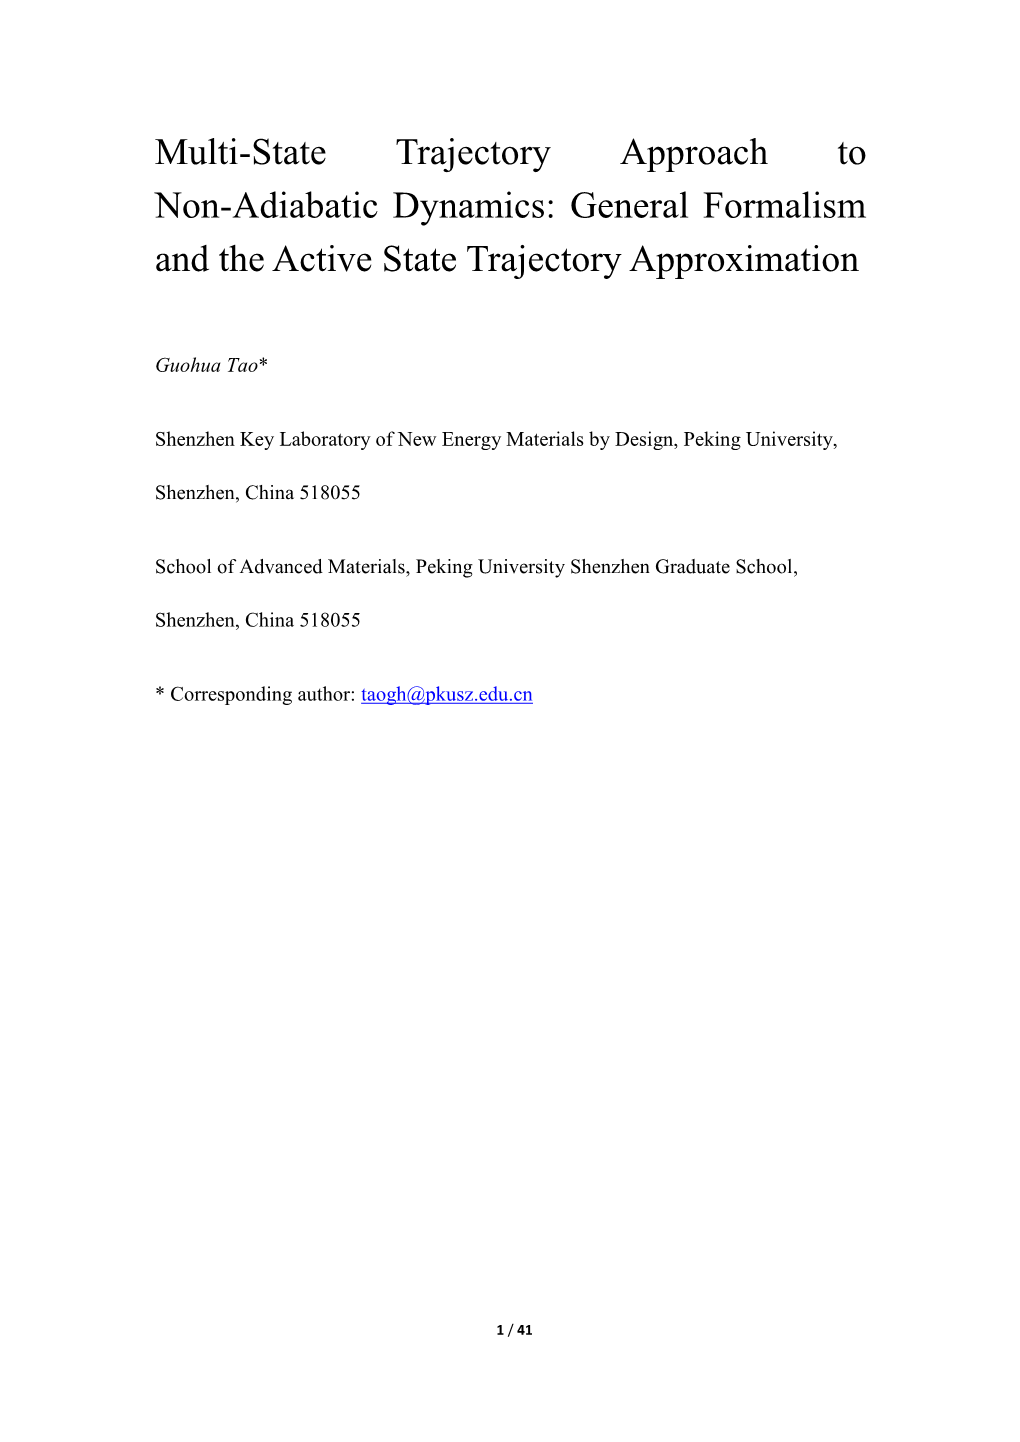 Multi-State Trajectory Approach to Non-Adiabatic Dynamics: General Formalism and the Active State Trajectory Approximation